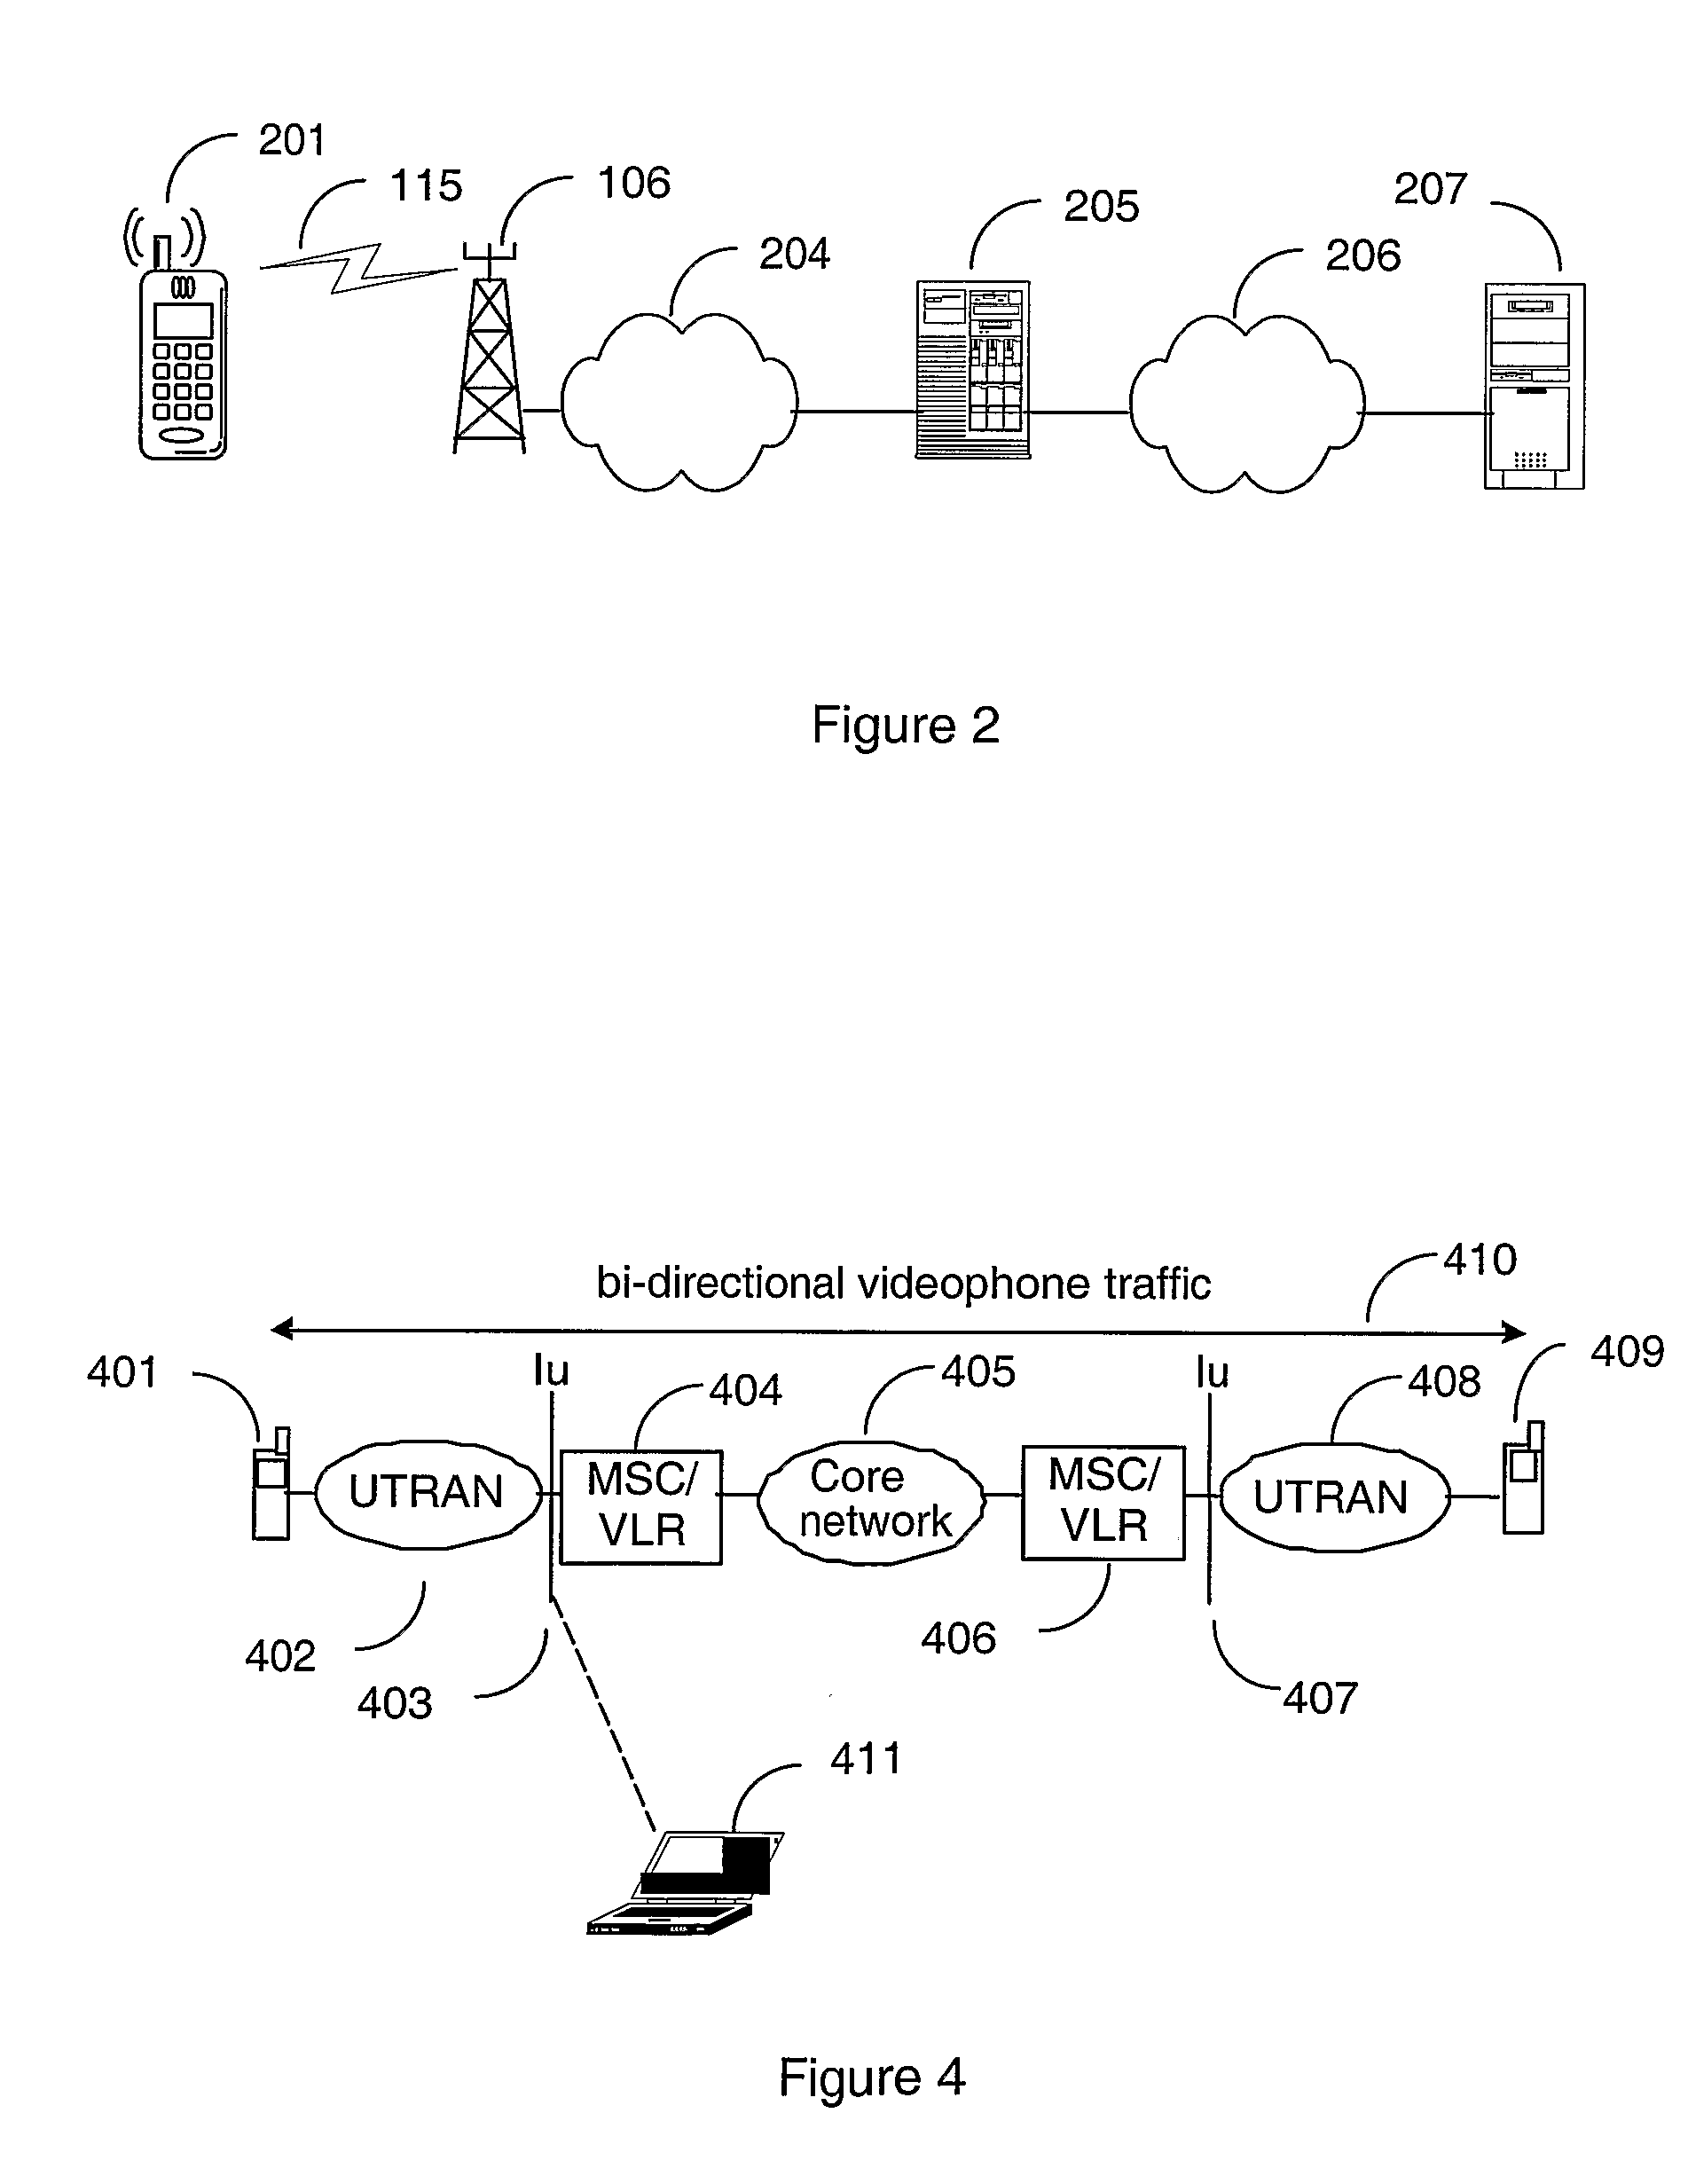 Performance analysis of a circuit switched mobile telecommunications network